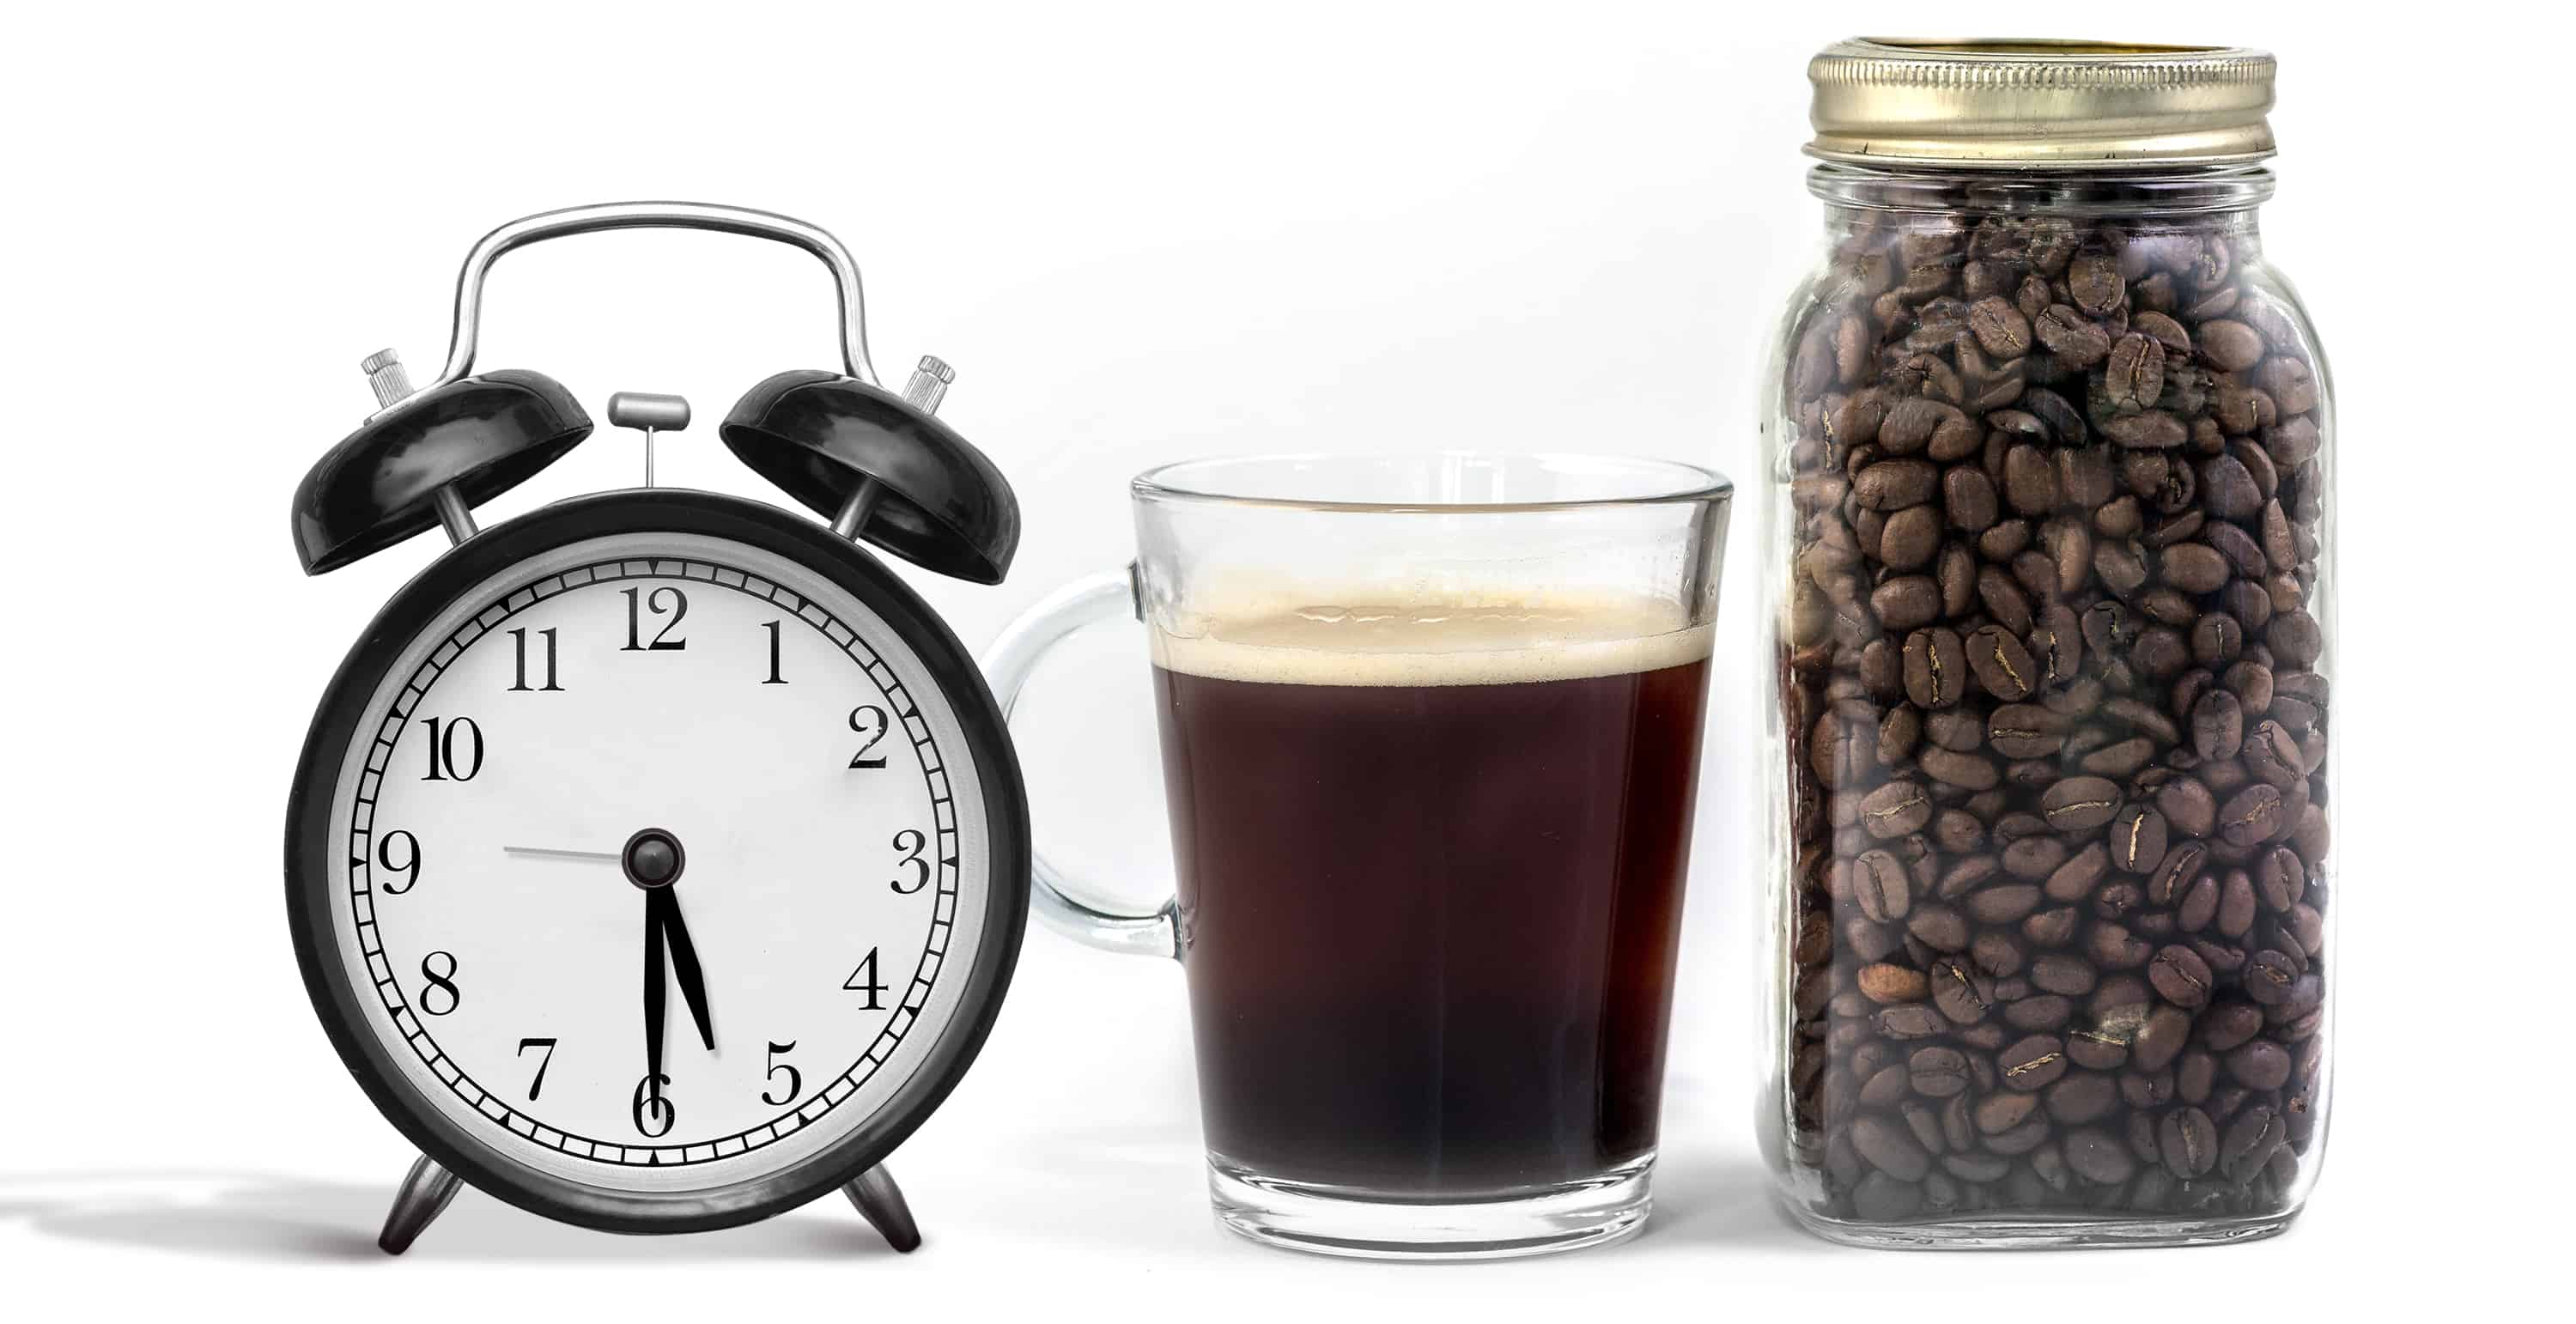 alarm clock showing 05:30 with coffee beans and glass mug